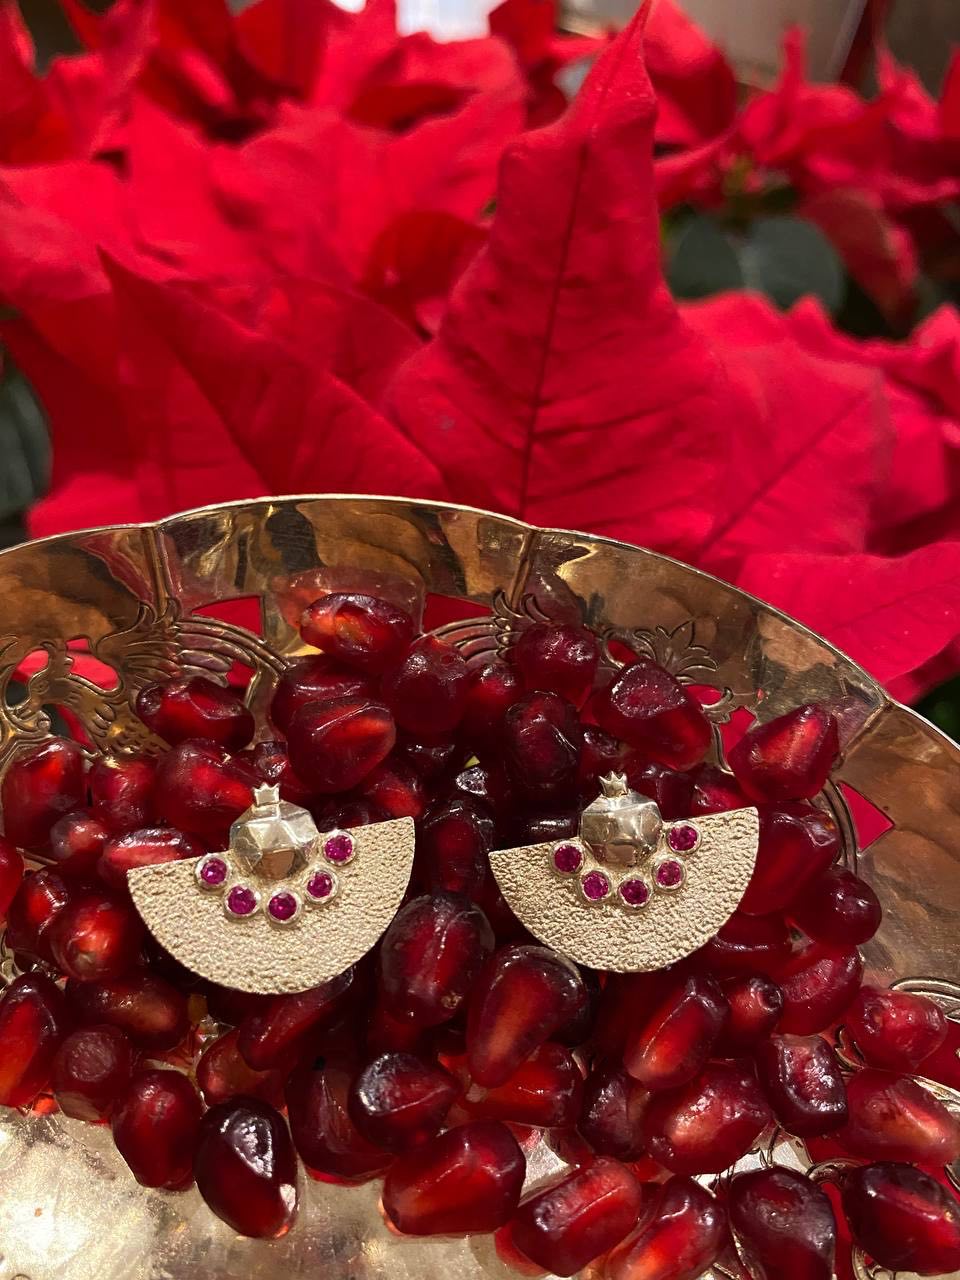 925 Silver pomegranate earrings with Ruby stones